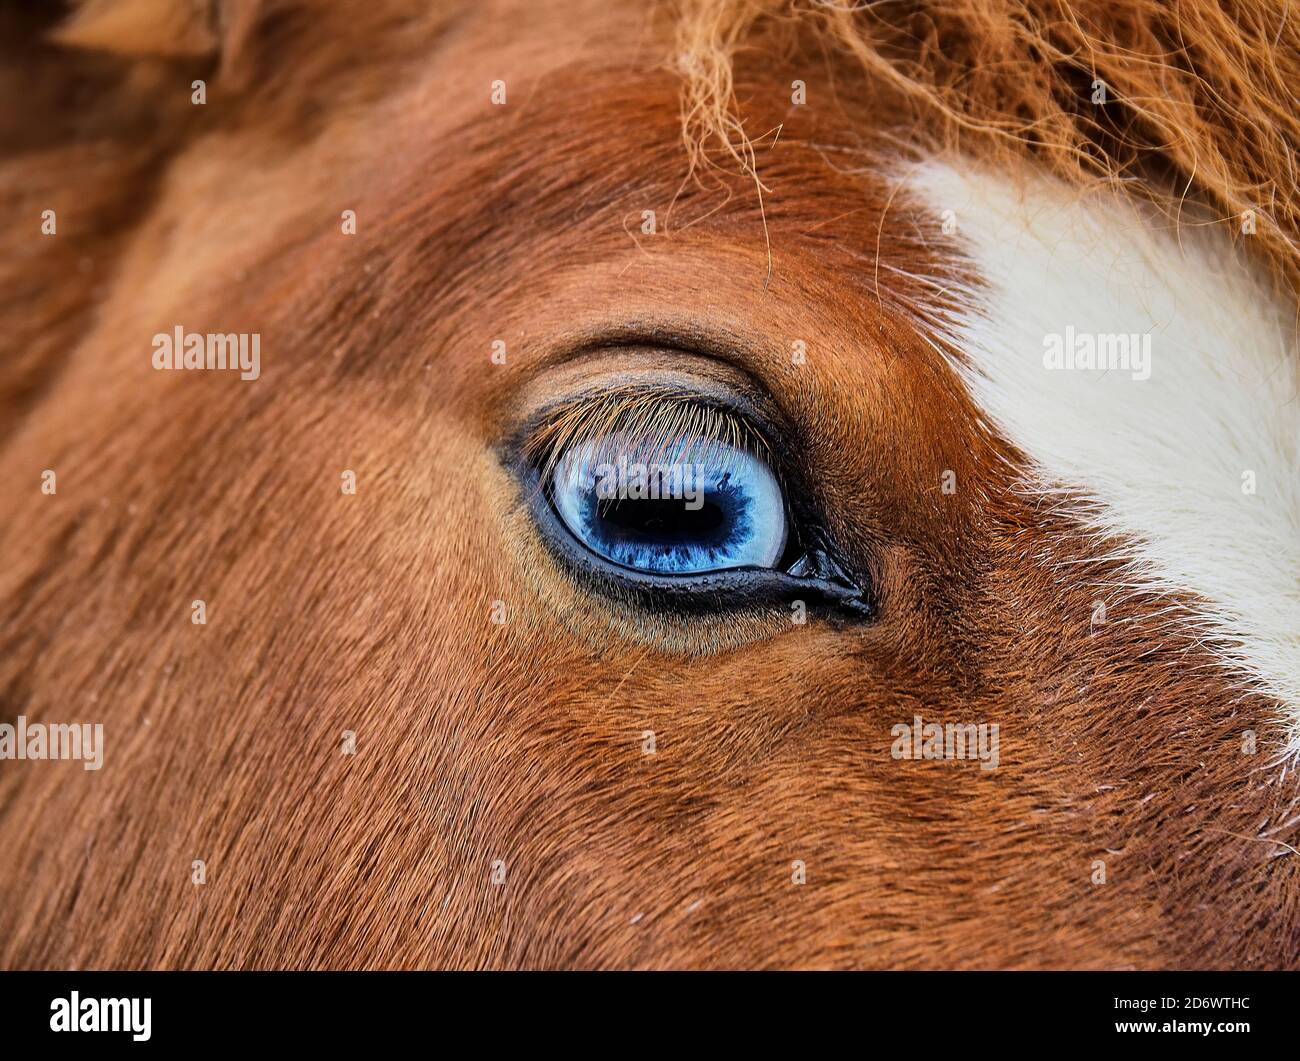 A close-up of the blue eye of a red Shetland horse Stock Photo